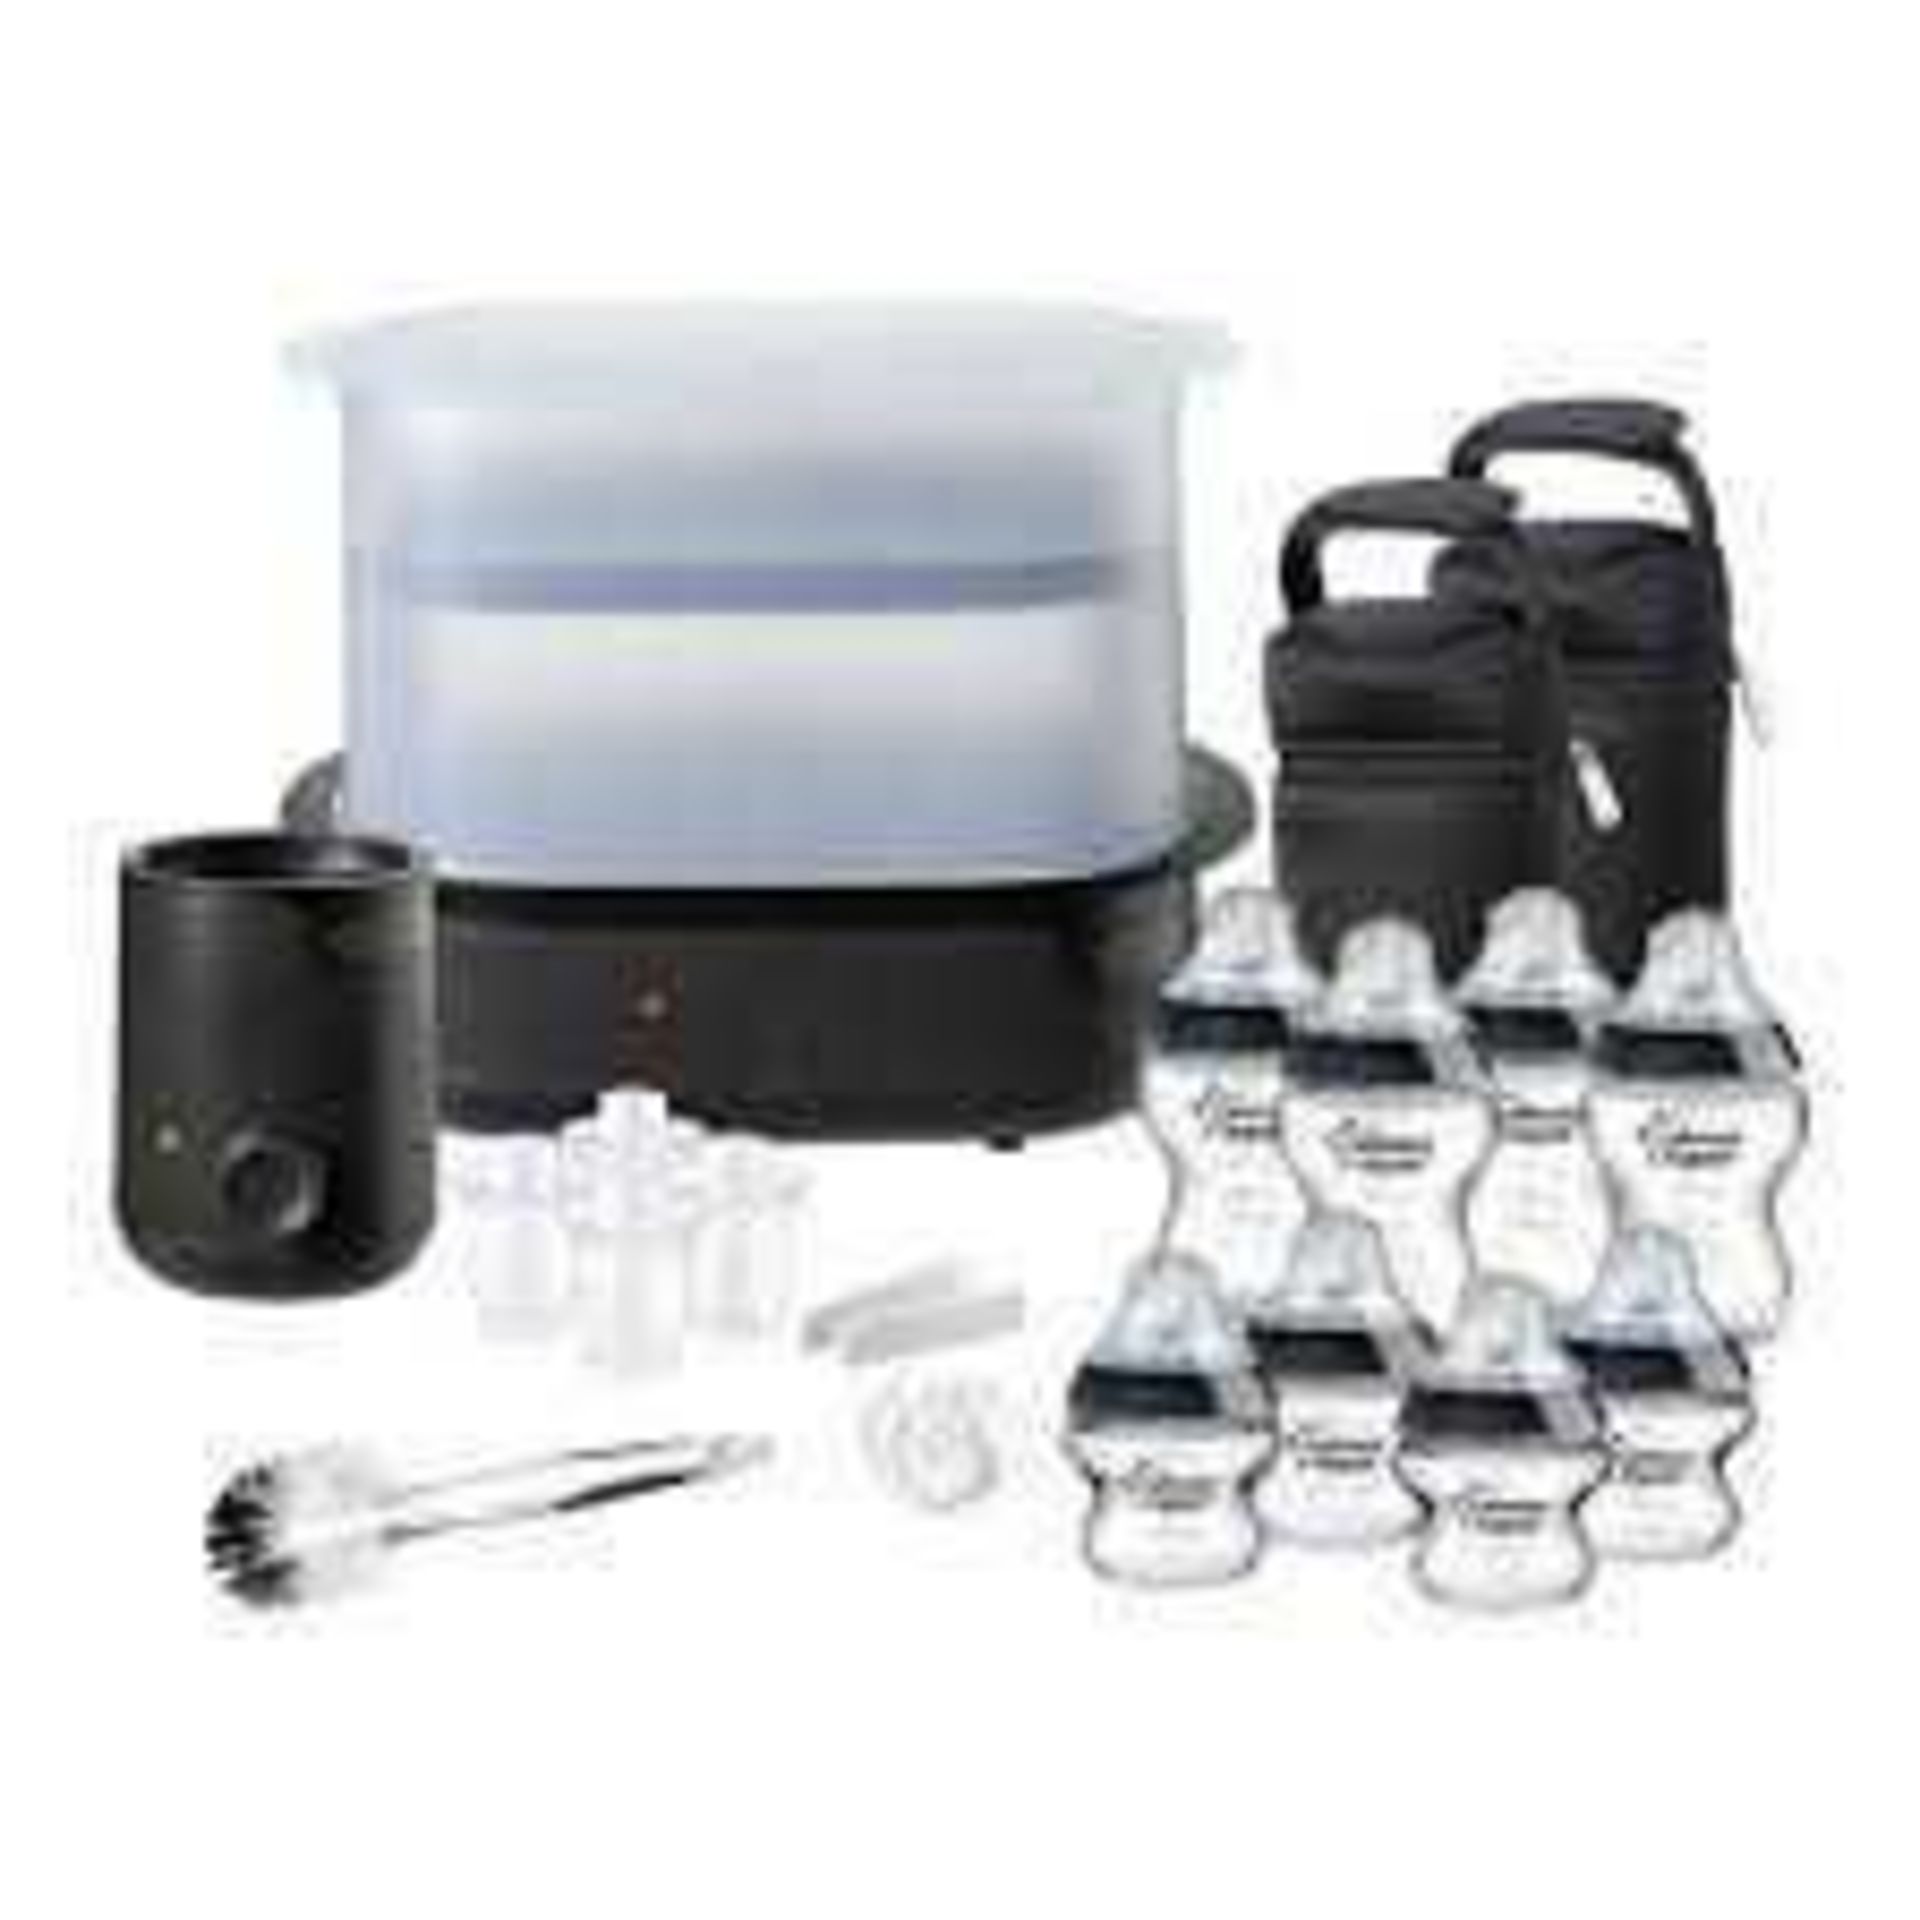 (AR) Combined RRP £165 Tommee Tippee Feeding Sets.